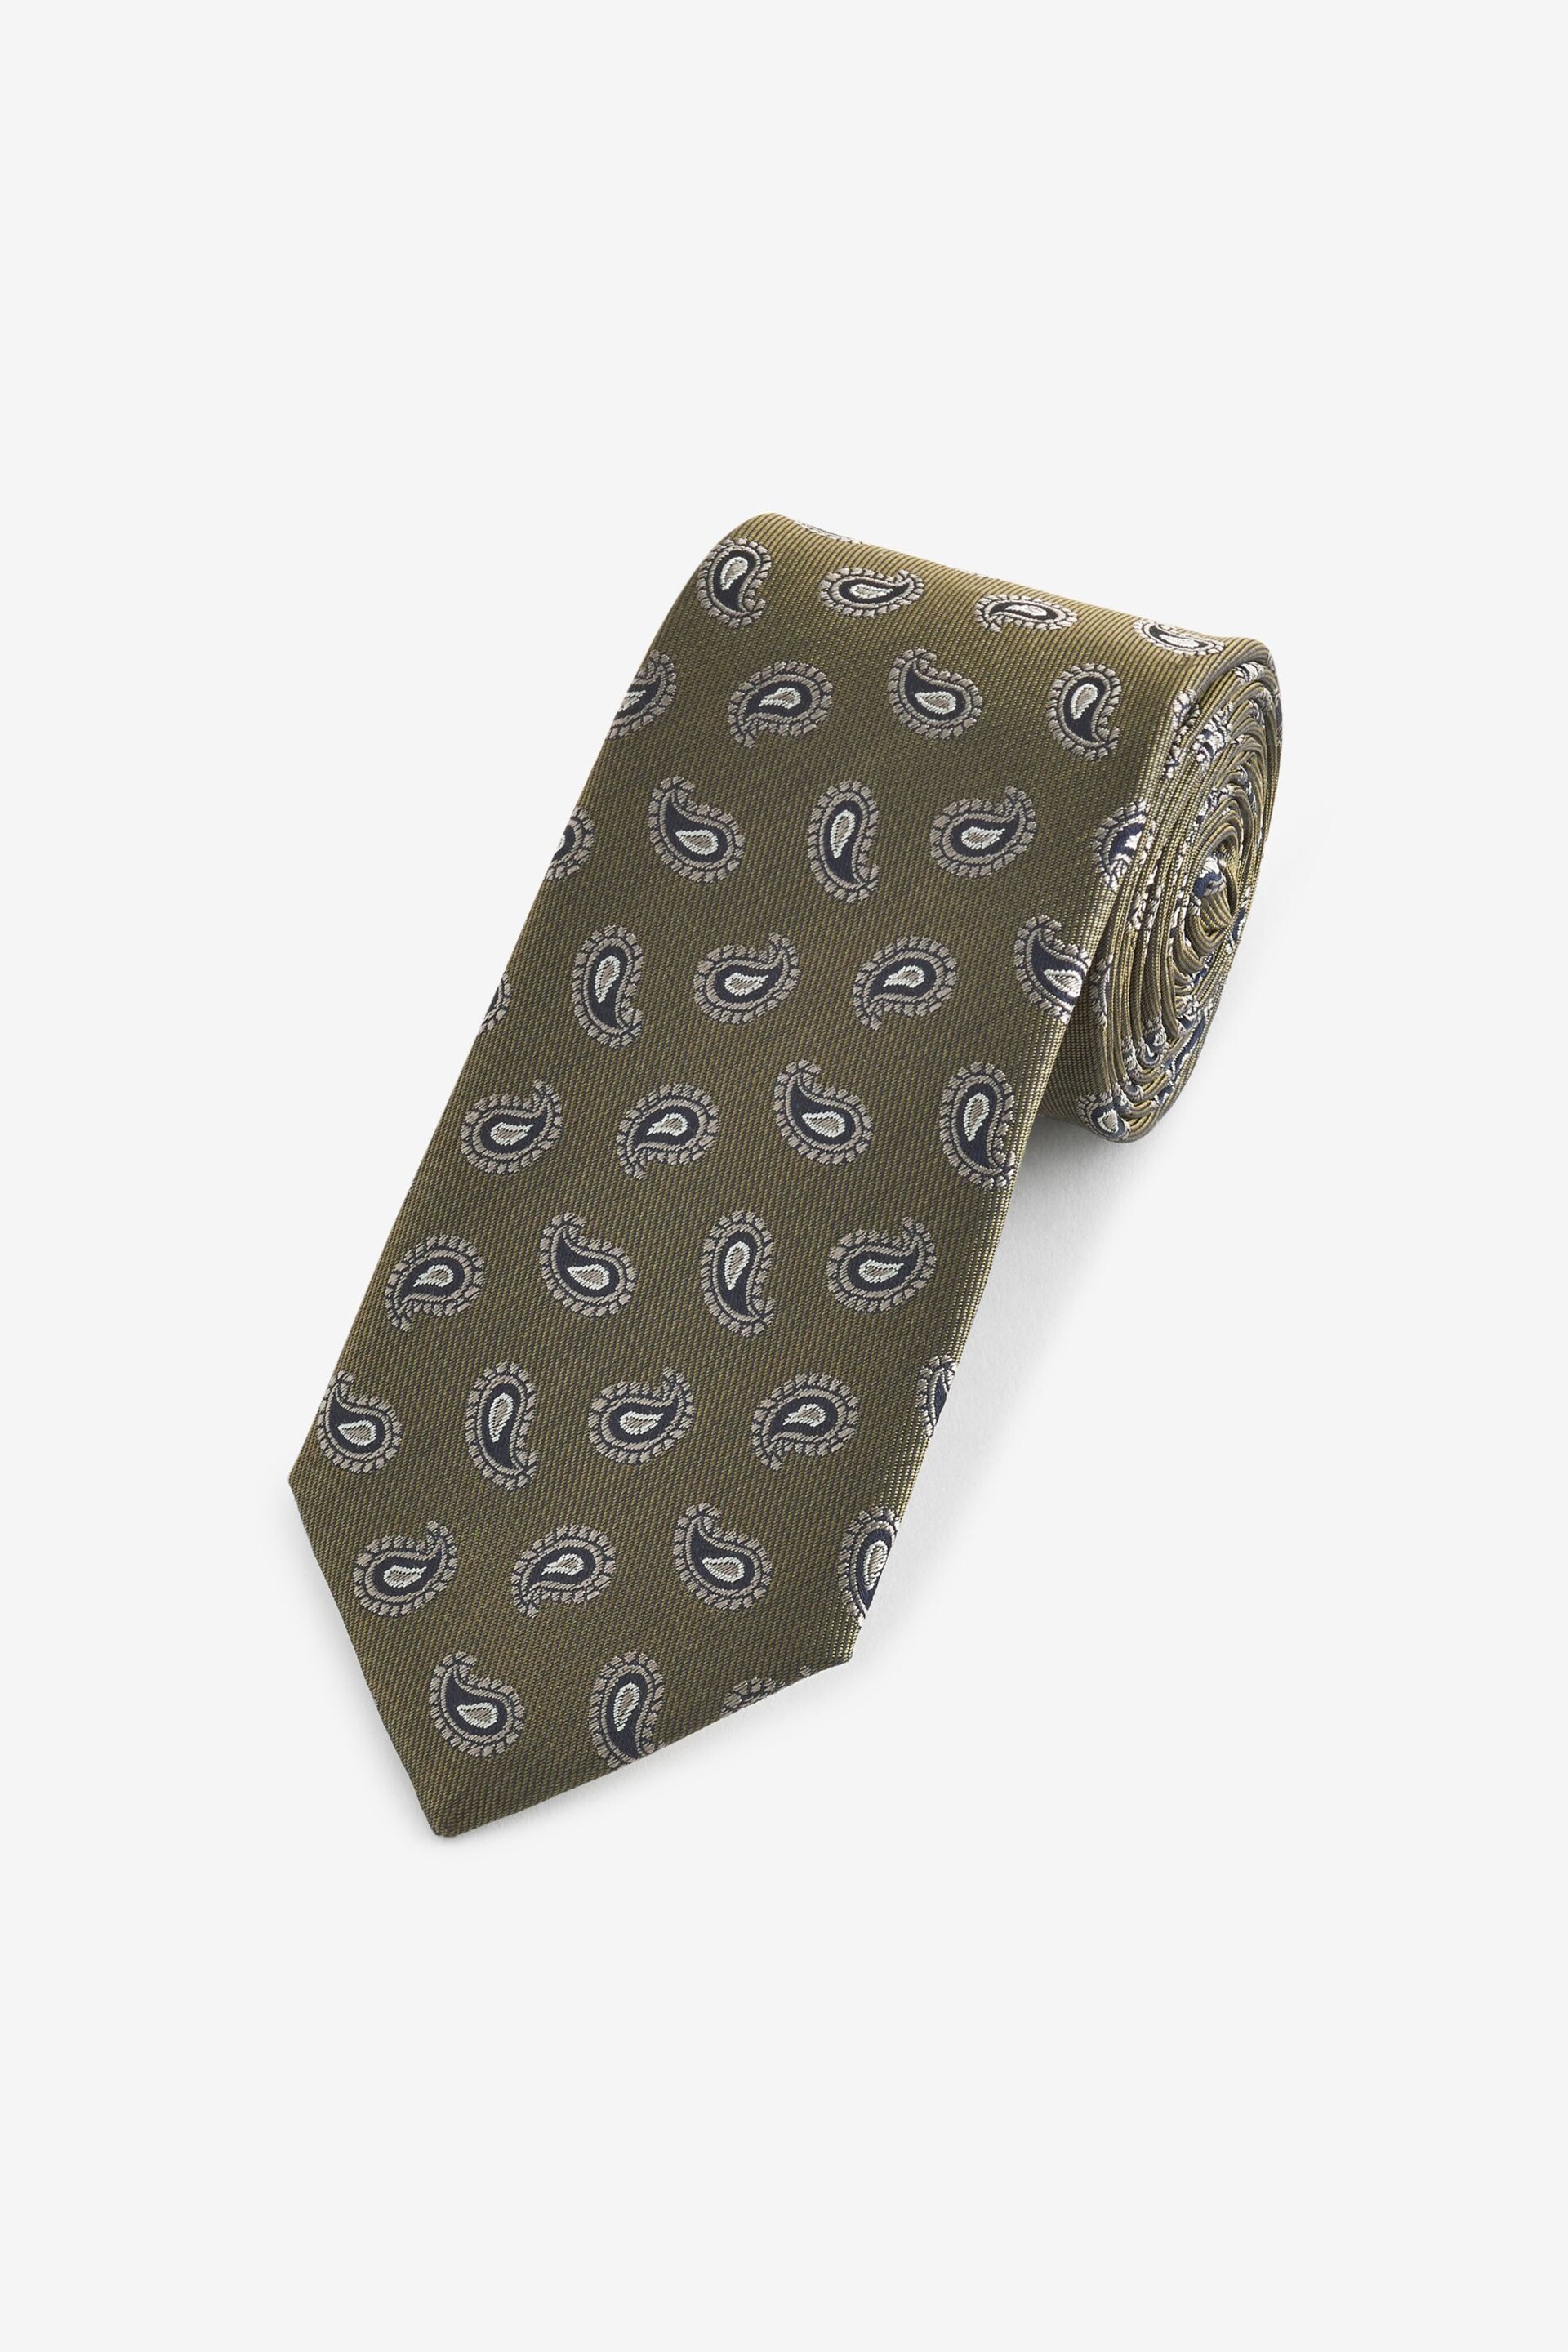 Khaki Green Paisley Signature Made In Italy Design Tie - Image 1 of 3